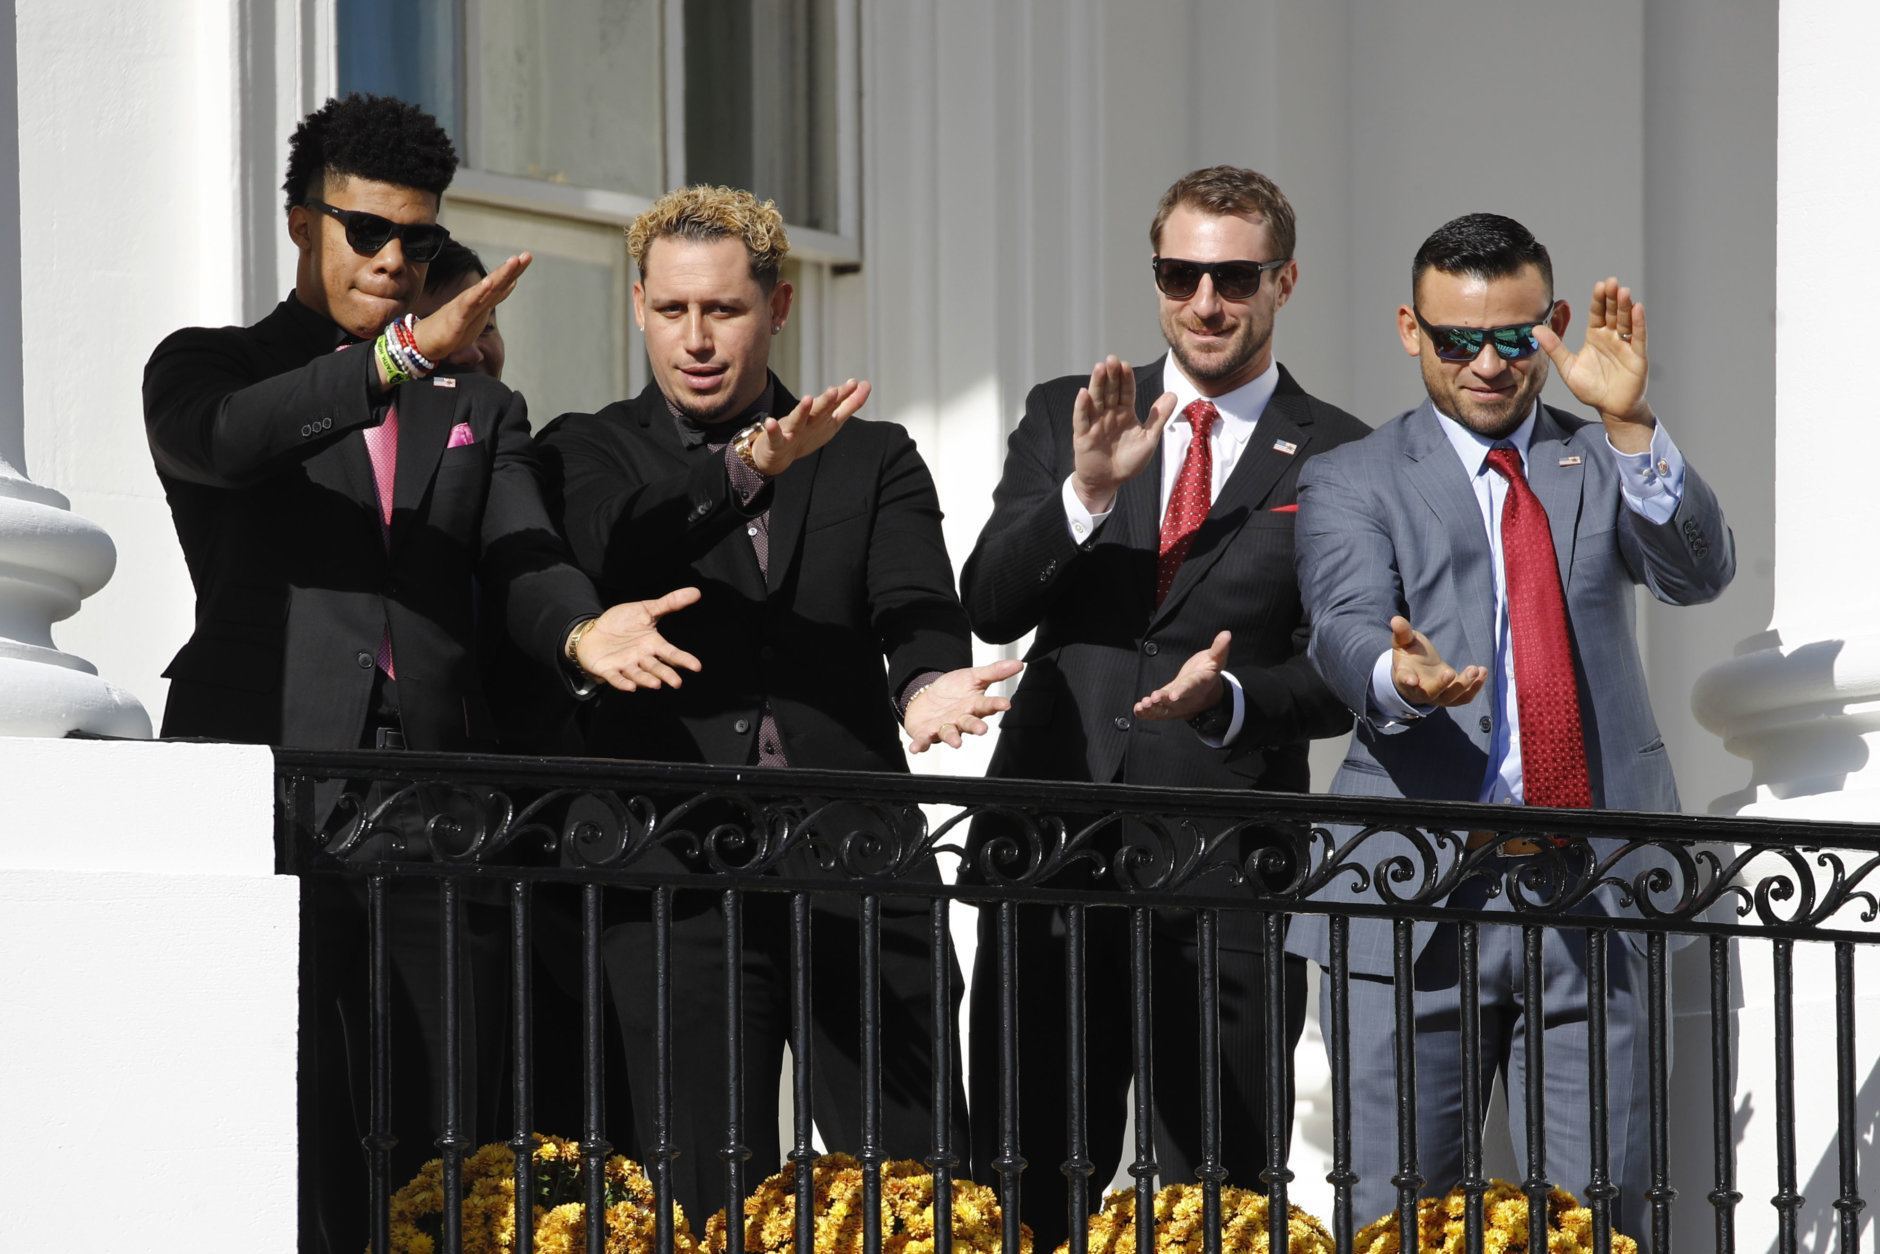 Finish the celebration: Nationals visit the White House - WTOP News